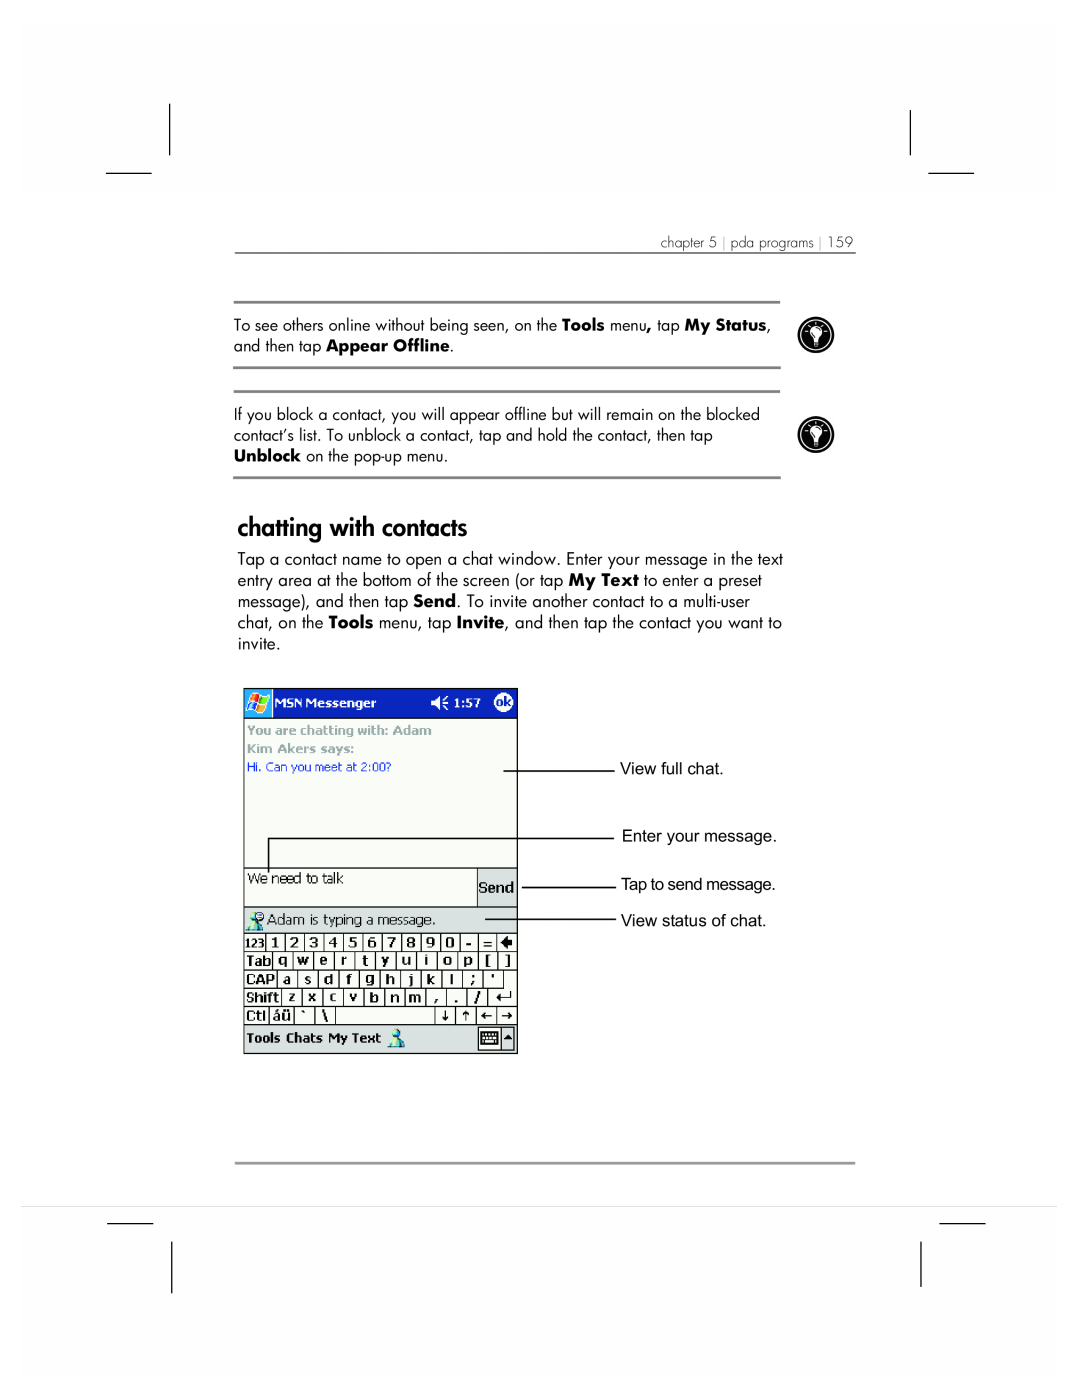 HP 920 manual chatting with contacts 